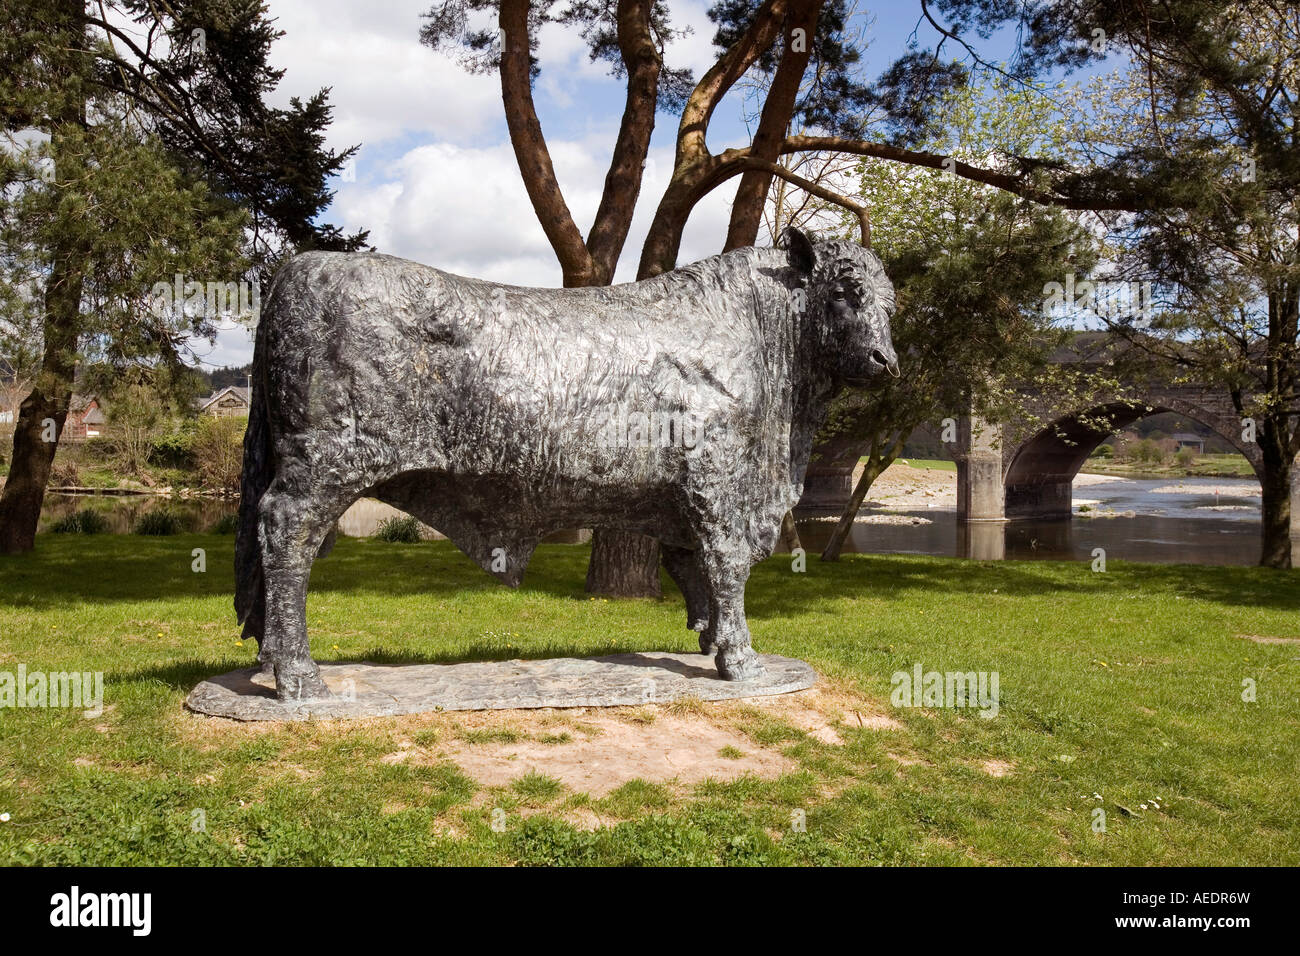 UK Wales Powys Builth Wells Bull sculpture by Gavin Fifield Stock Photo